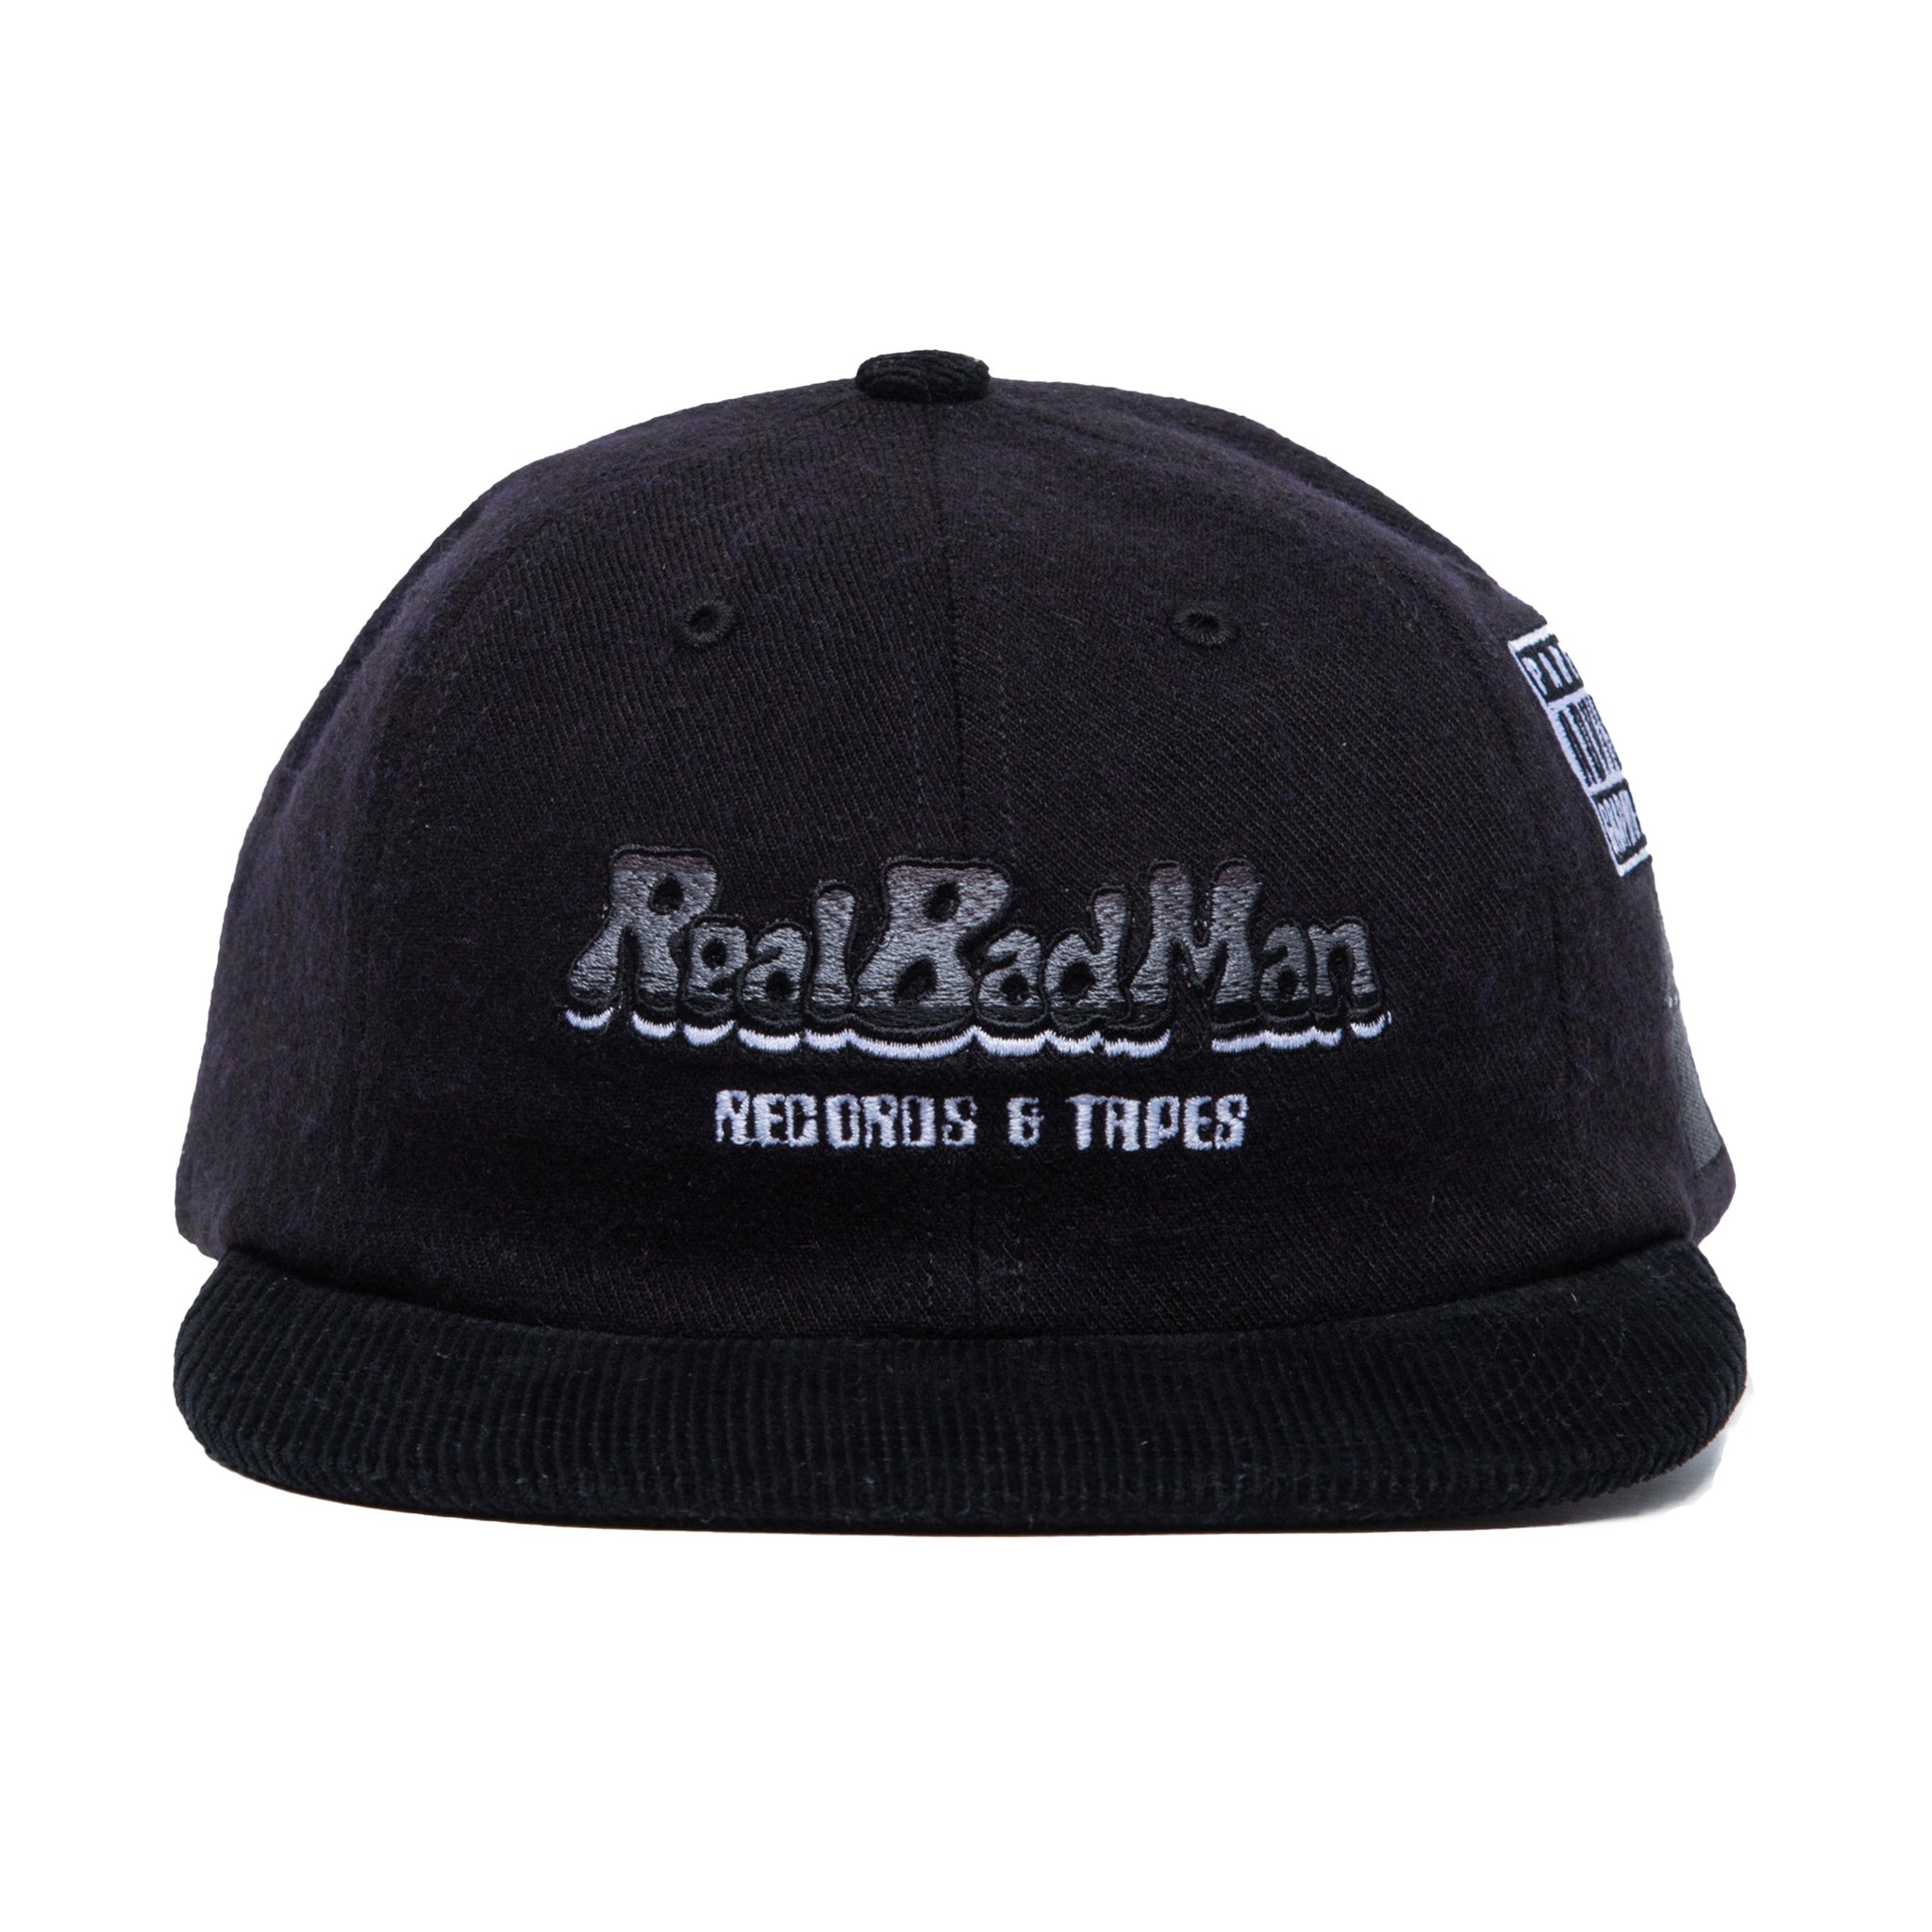 Records & Tapes Hat - Black